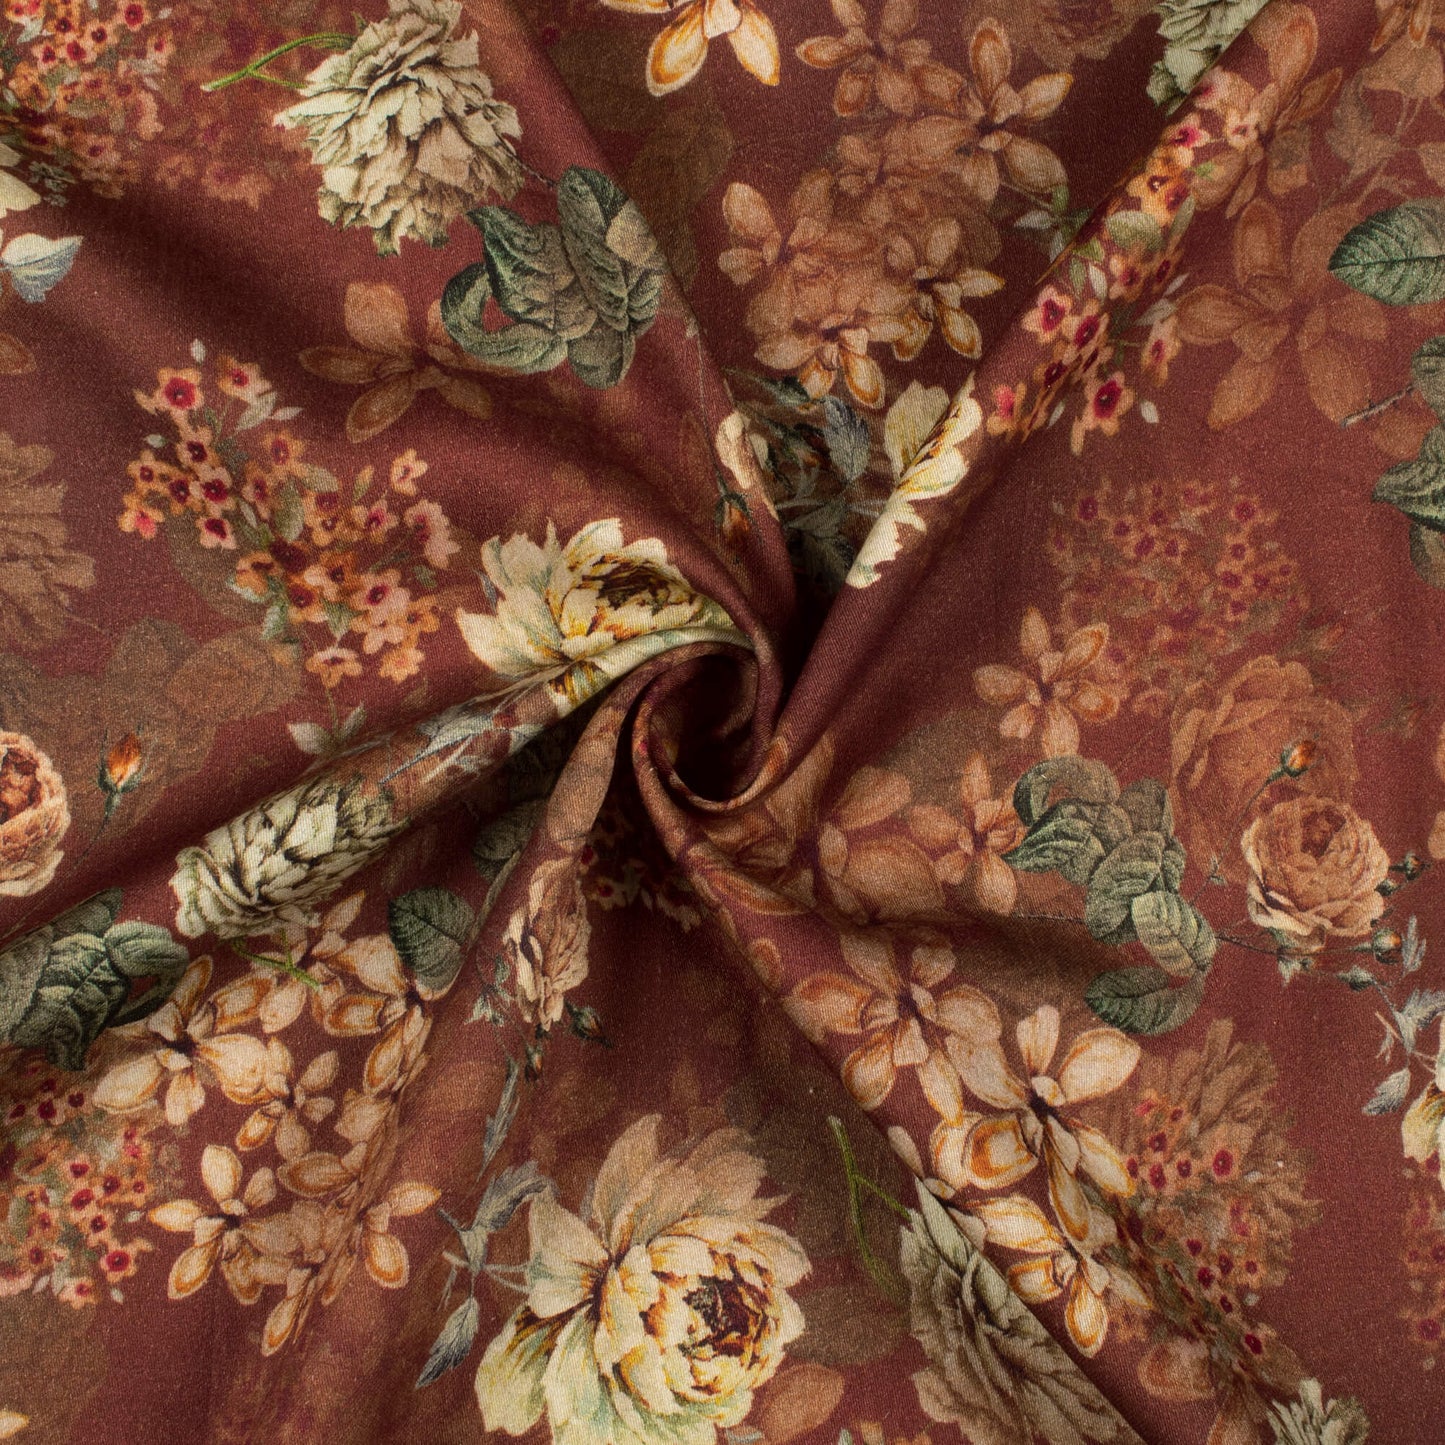 Caramel Brown And Peach Floral Digital Print Viscose Rayon Fabric(Width 58 Inches)